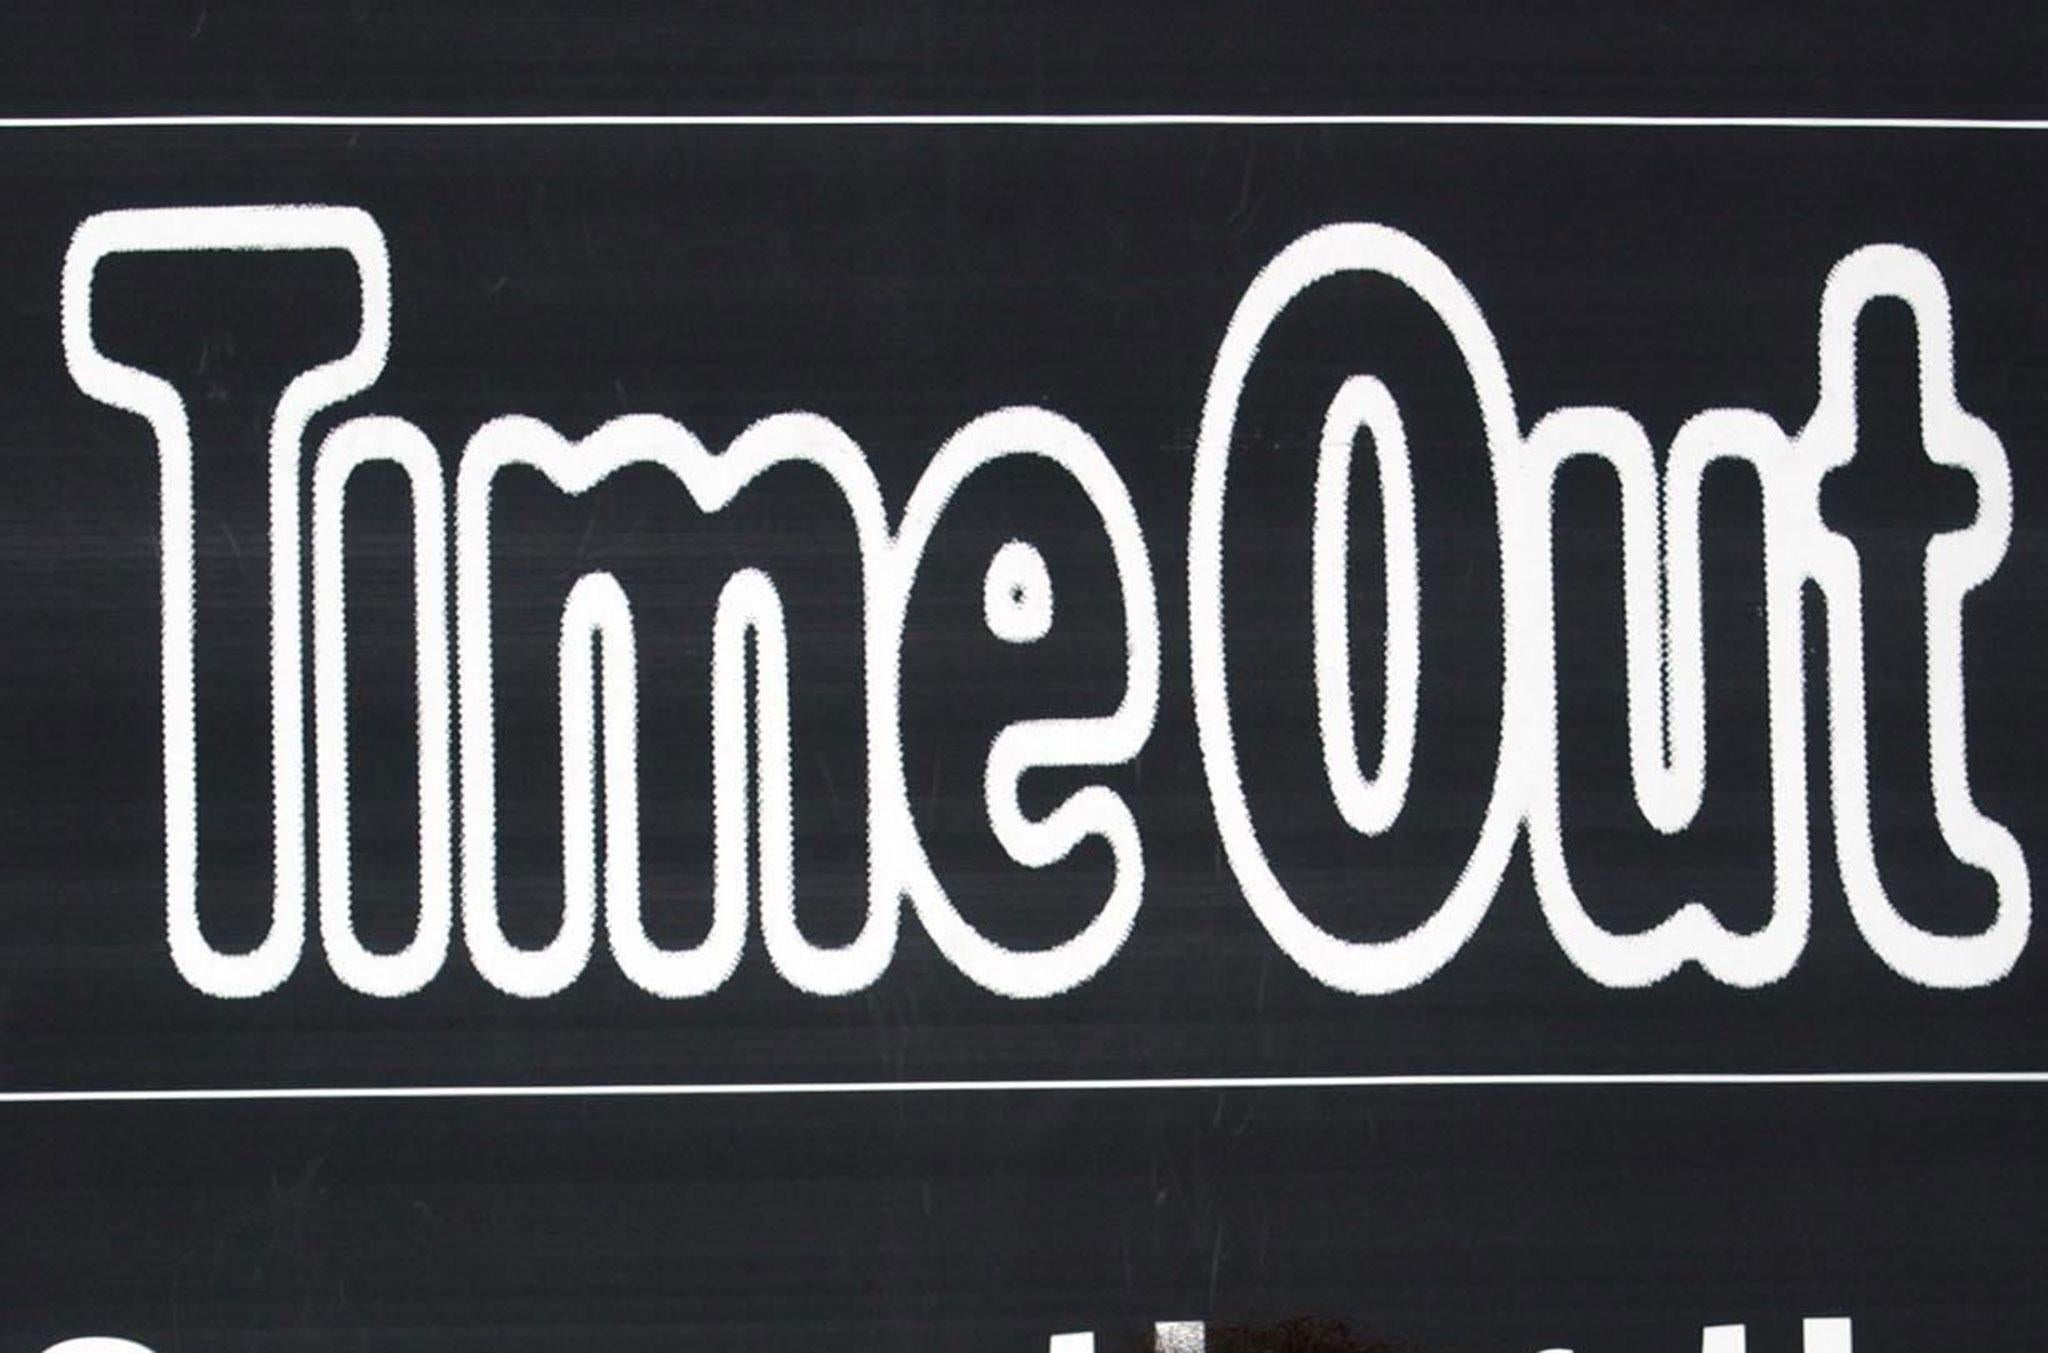 Time Out Digital revenues rose 8 per cent to £16.1m, with digital advertising up 8 per cent to £4.4m